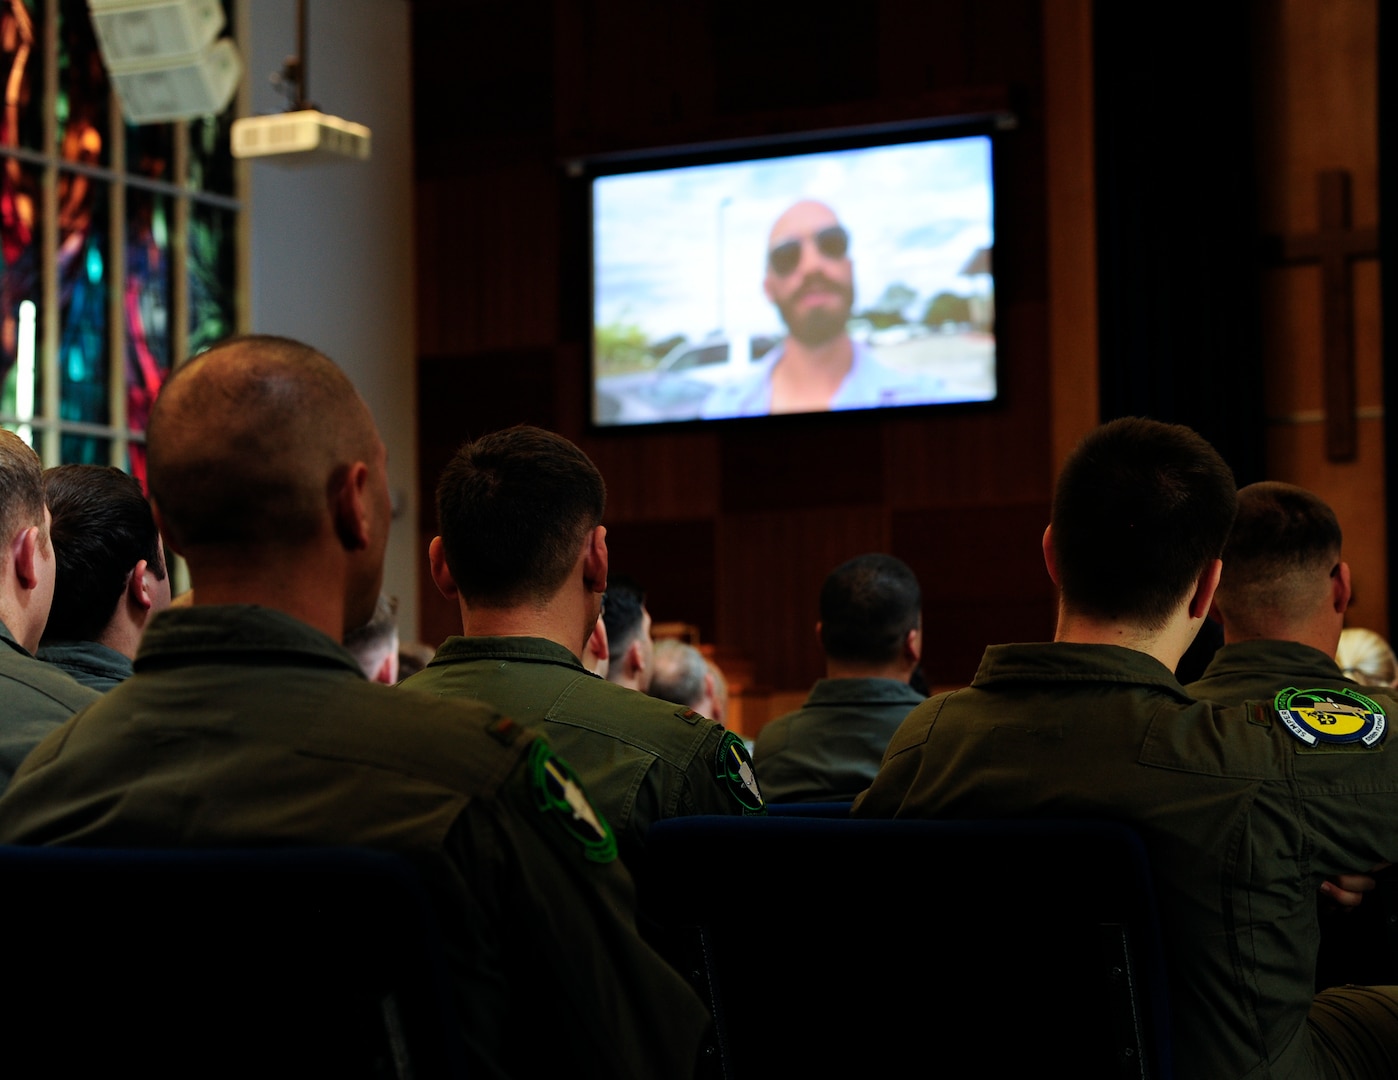 An audience of military members and civilians watch a video that provides a “snapshot” of what Andrew O’Brien, an Iraq War veteran, calls “This Crazy Journey” at Joint Base San Antonio-Randolph, Texas, Sept. 10, 2019. The Randolph mental health clinic invited O’Brien to share his experience as part of Suicide Awareness and Prevention Month activities.